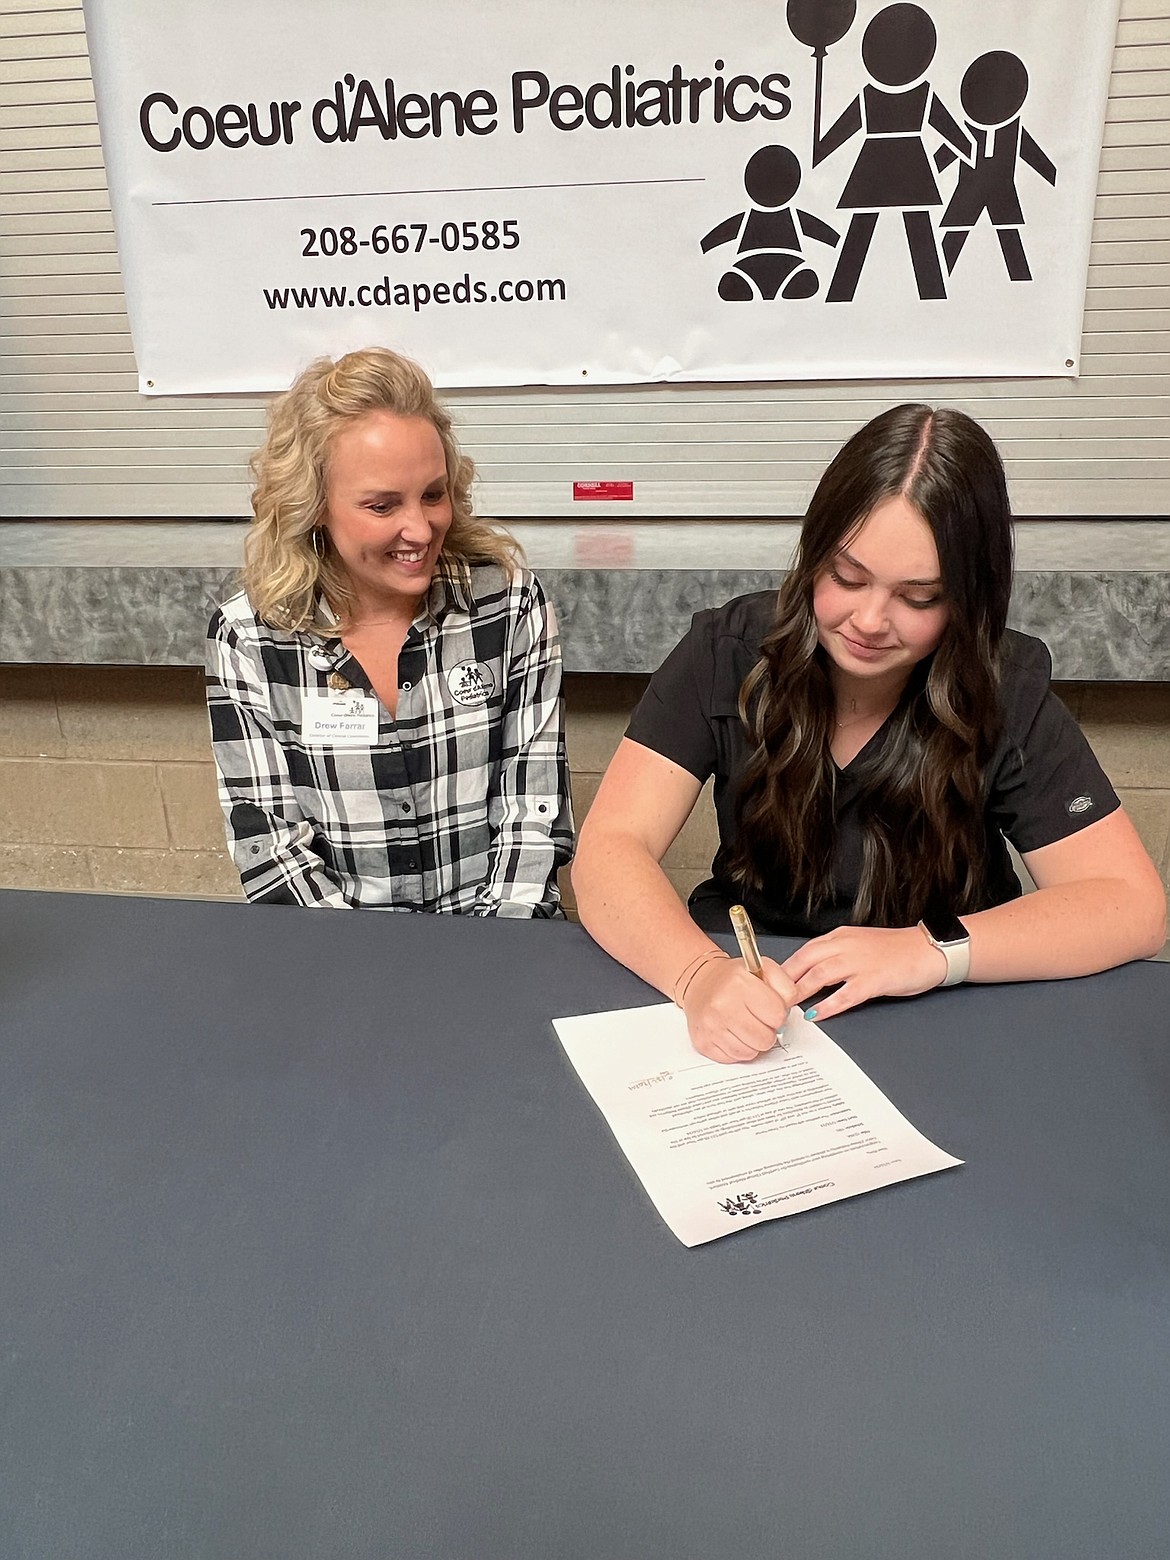 Drew Farrar, left, representing Coeur d'Alene Pediatrics, witnesses KTEC and Lake City High senior Riley Smalley sign on with the practice Wednesday during KTEC's signing day.